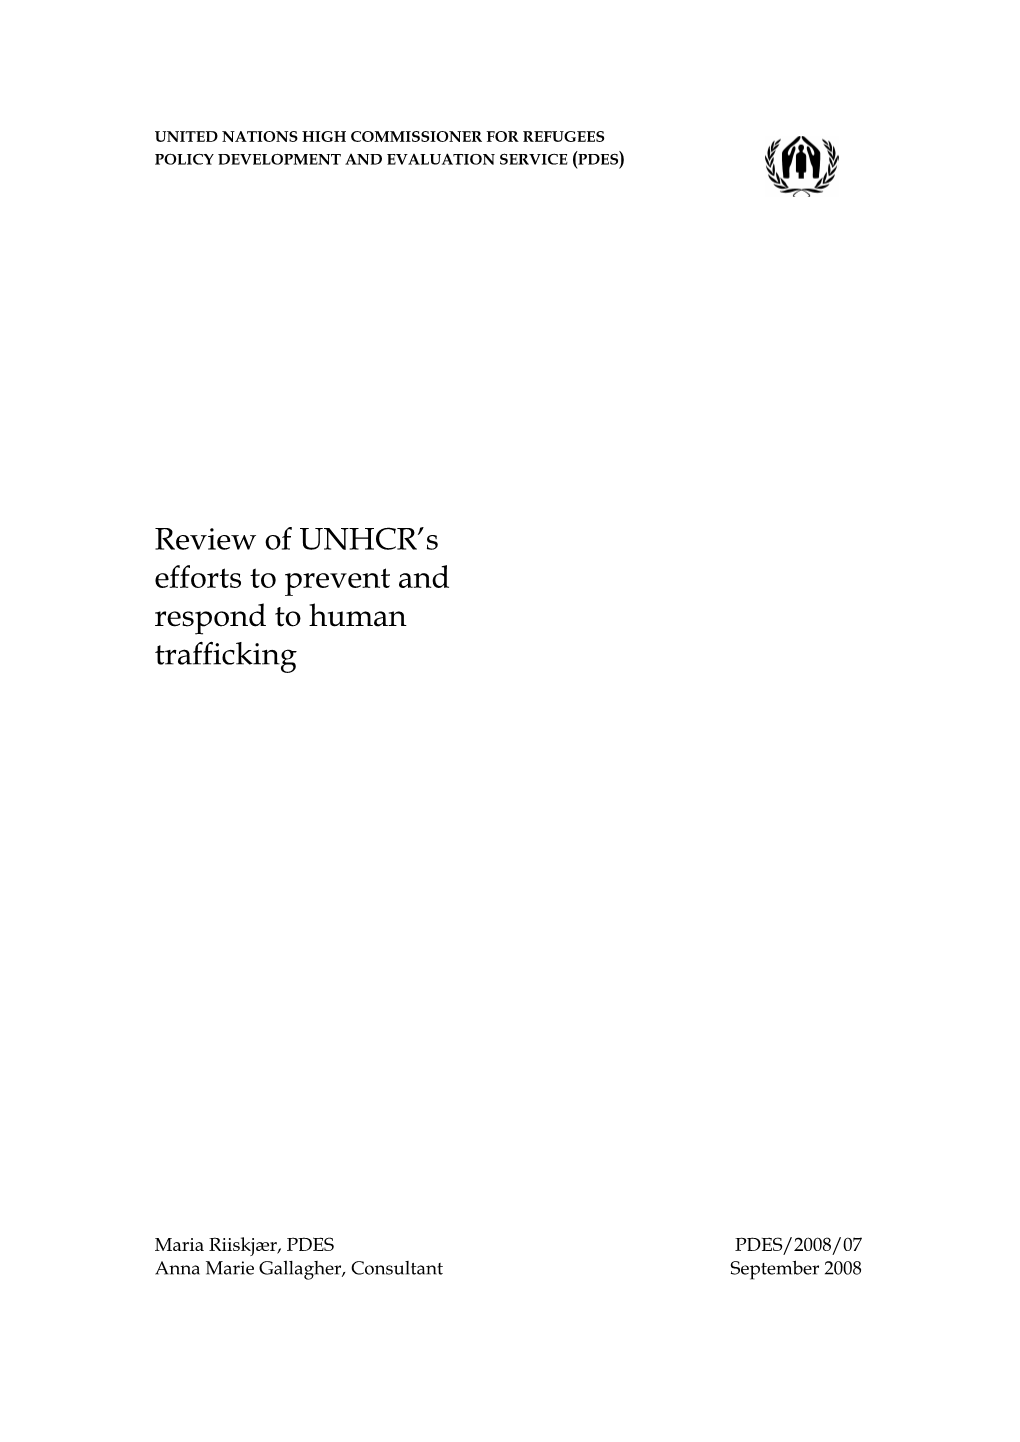 Review of UNHCR's Efforts to Prevent and Respond to Human Trafficking